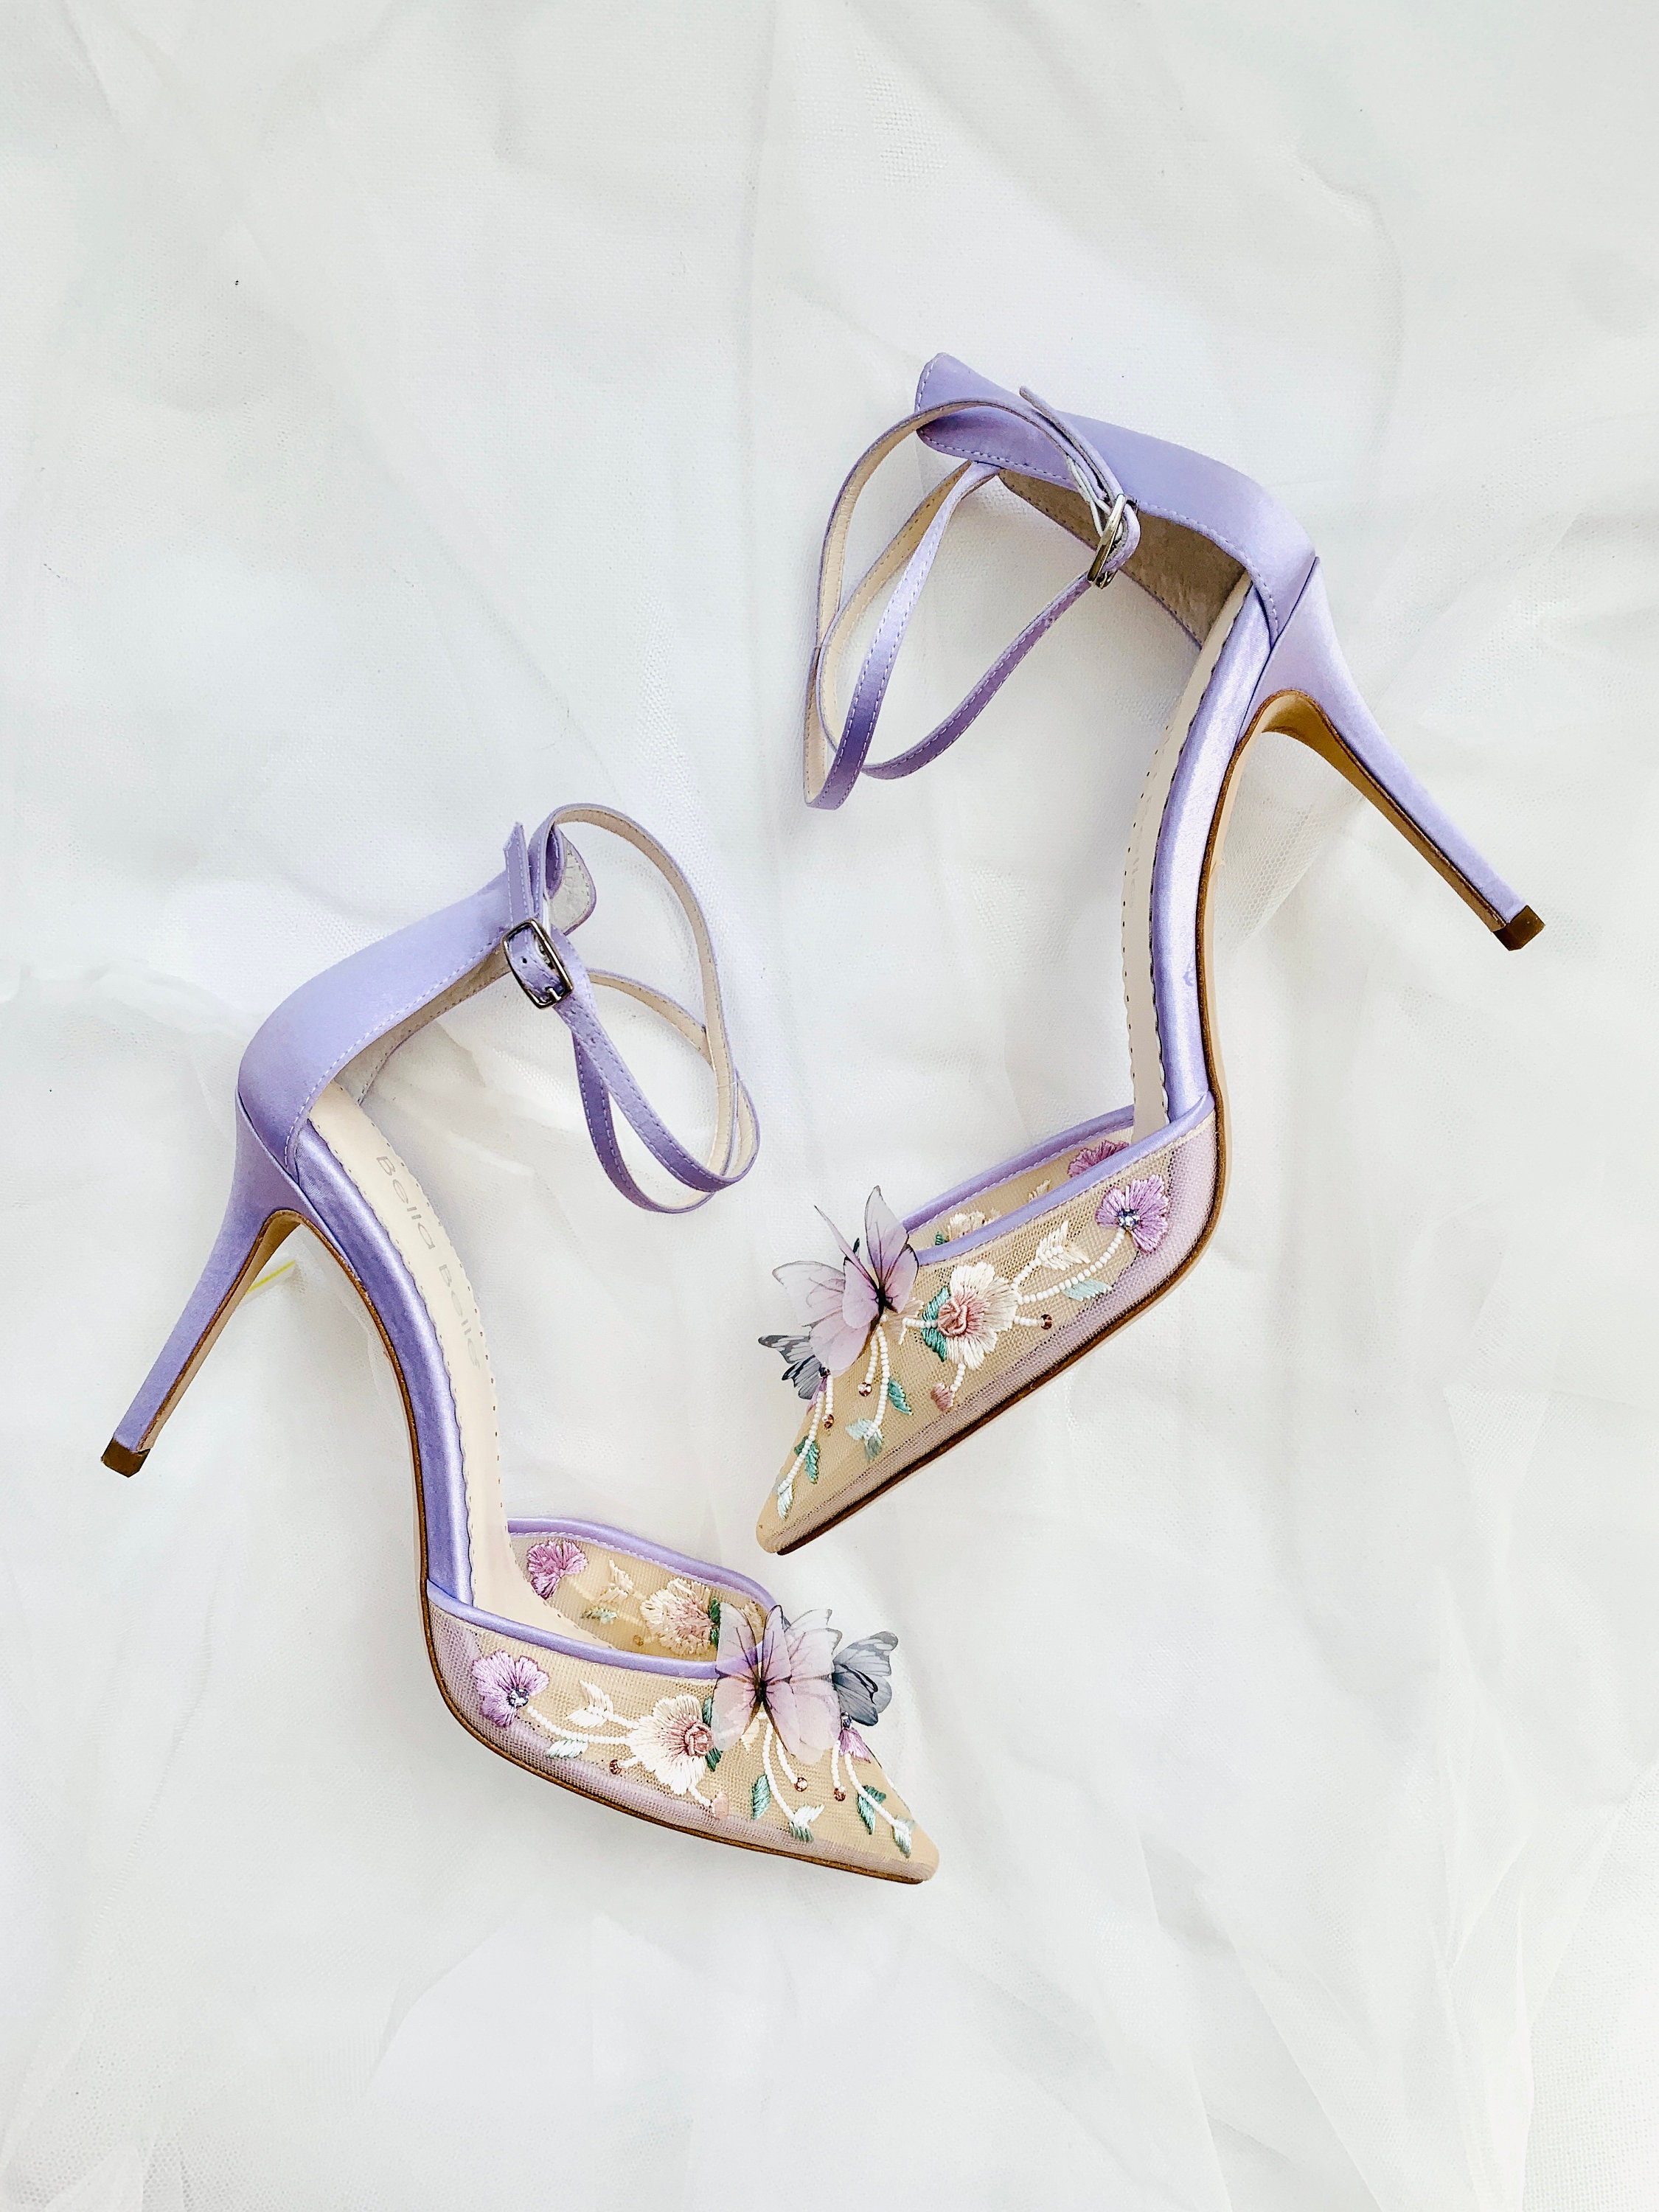 Lavender Glitter High Heels With Crystal Soles. Bridal Shoes. Sizes 5.5-11  - Etsy